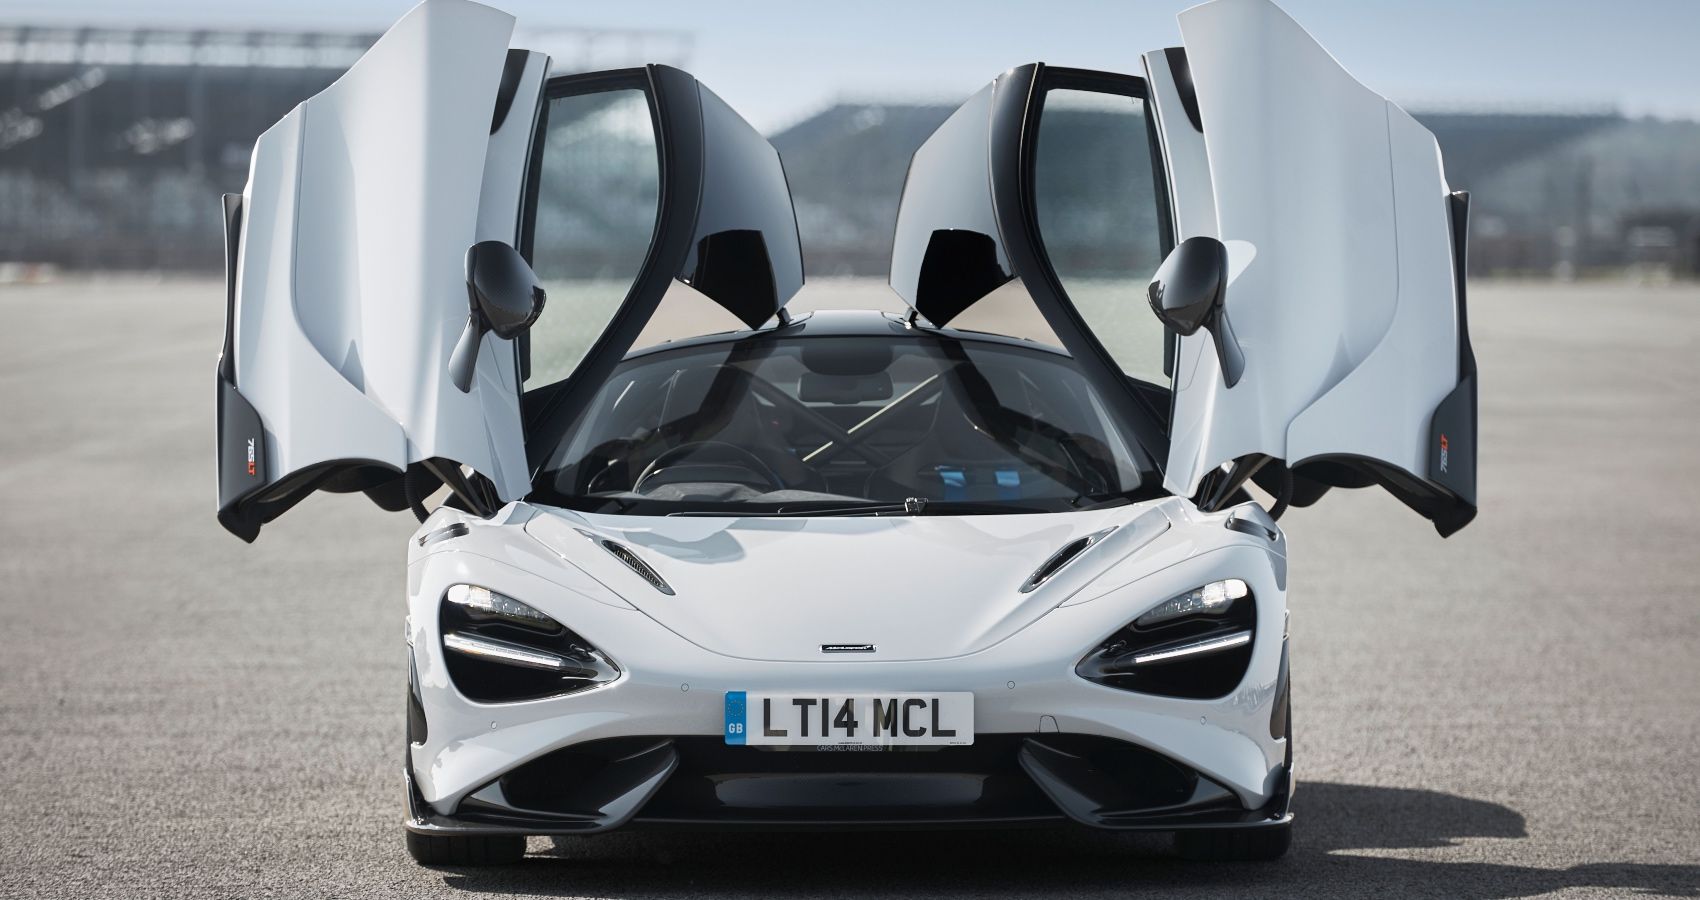 Real Reason McLarens Depreciate Badly, And Why Used Ones Are Great Bargains